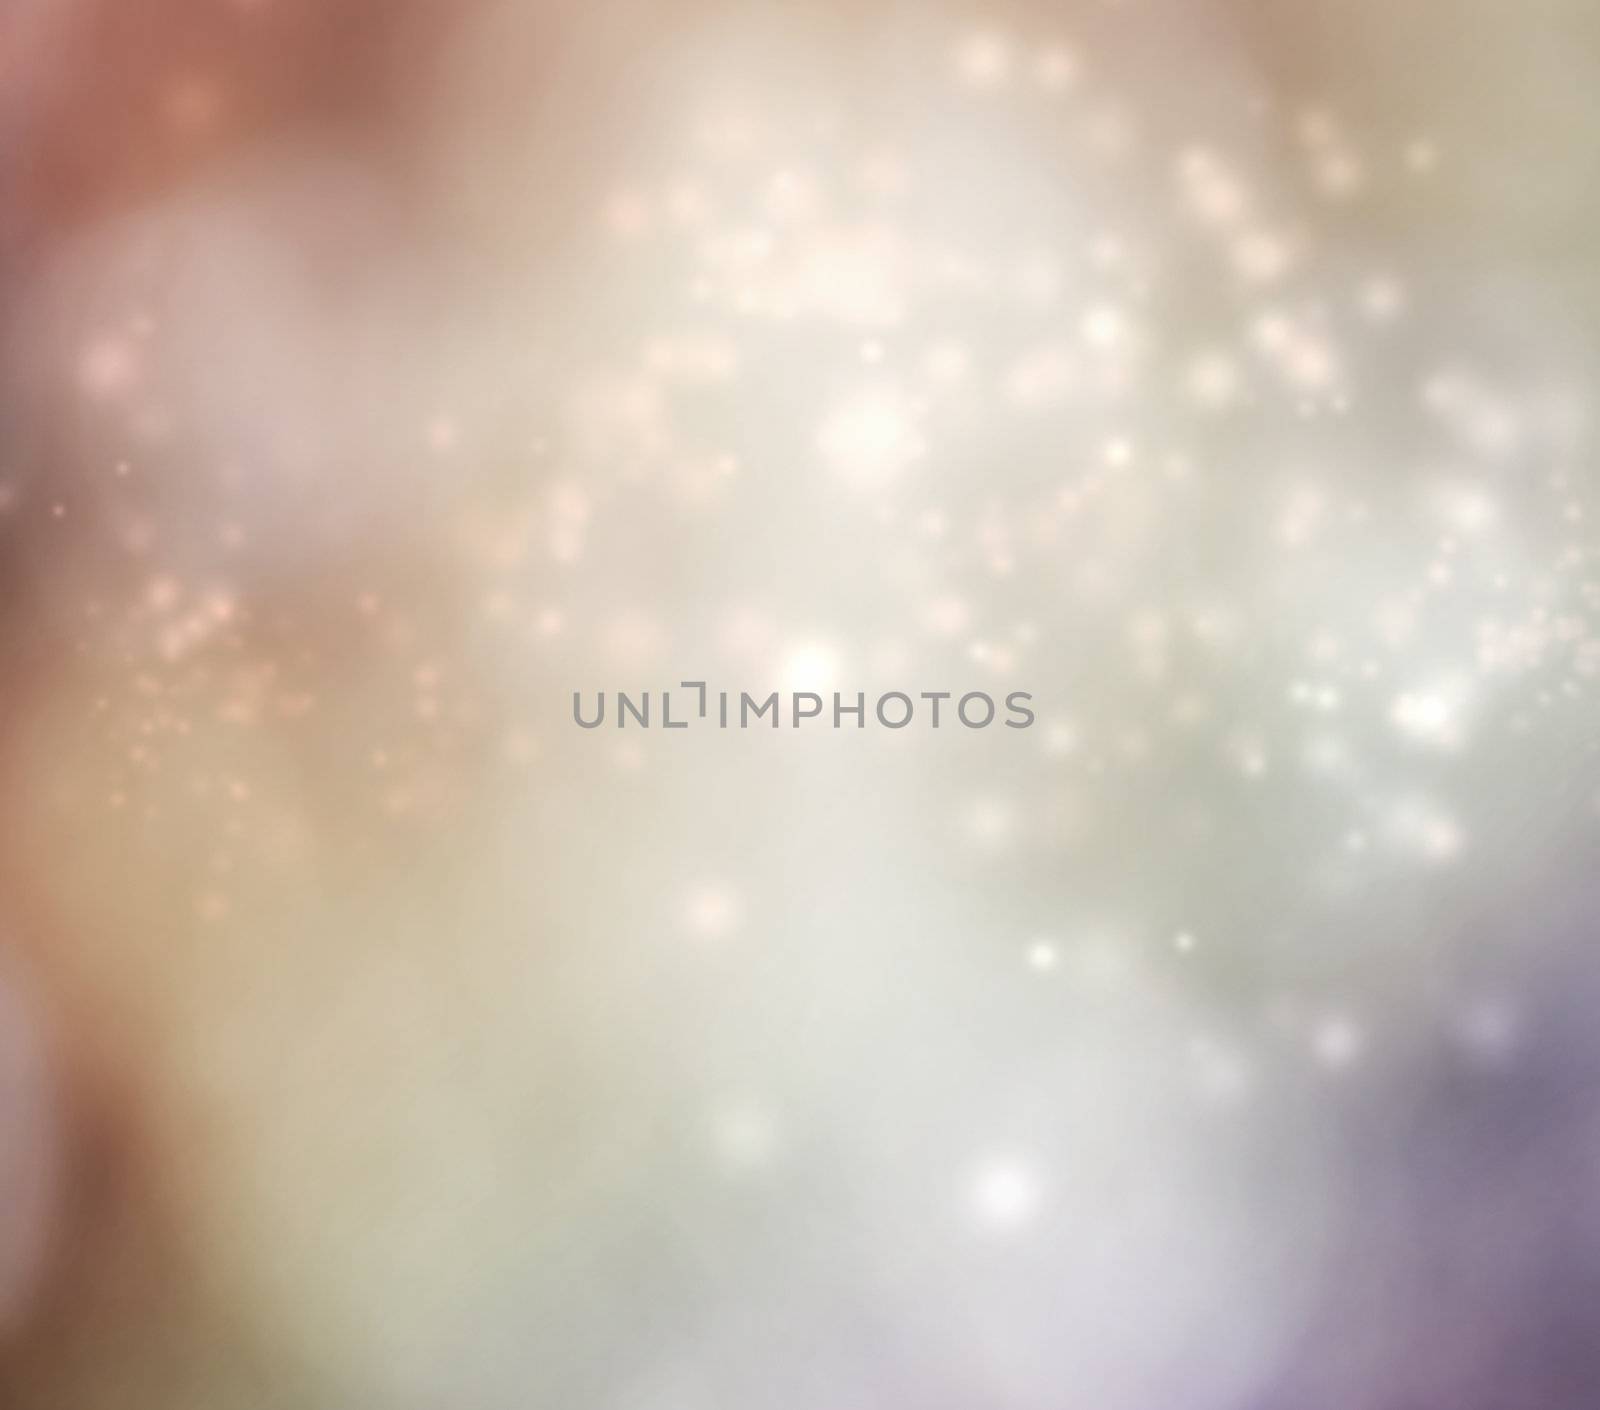 Abstract light background - brown and purple